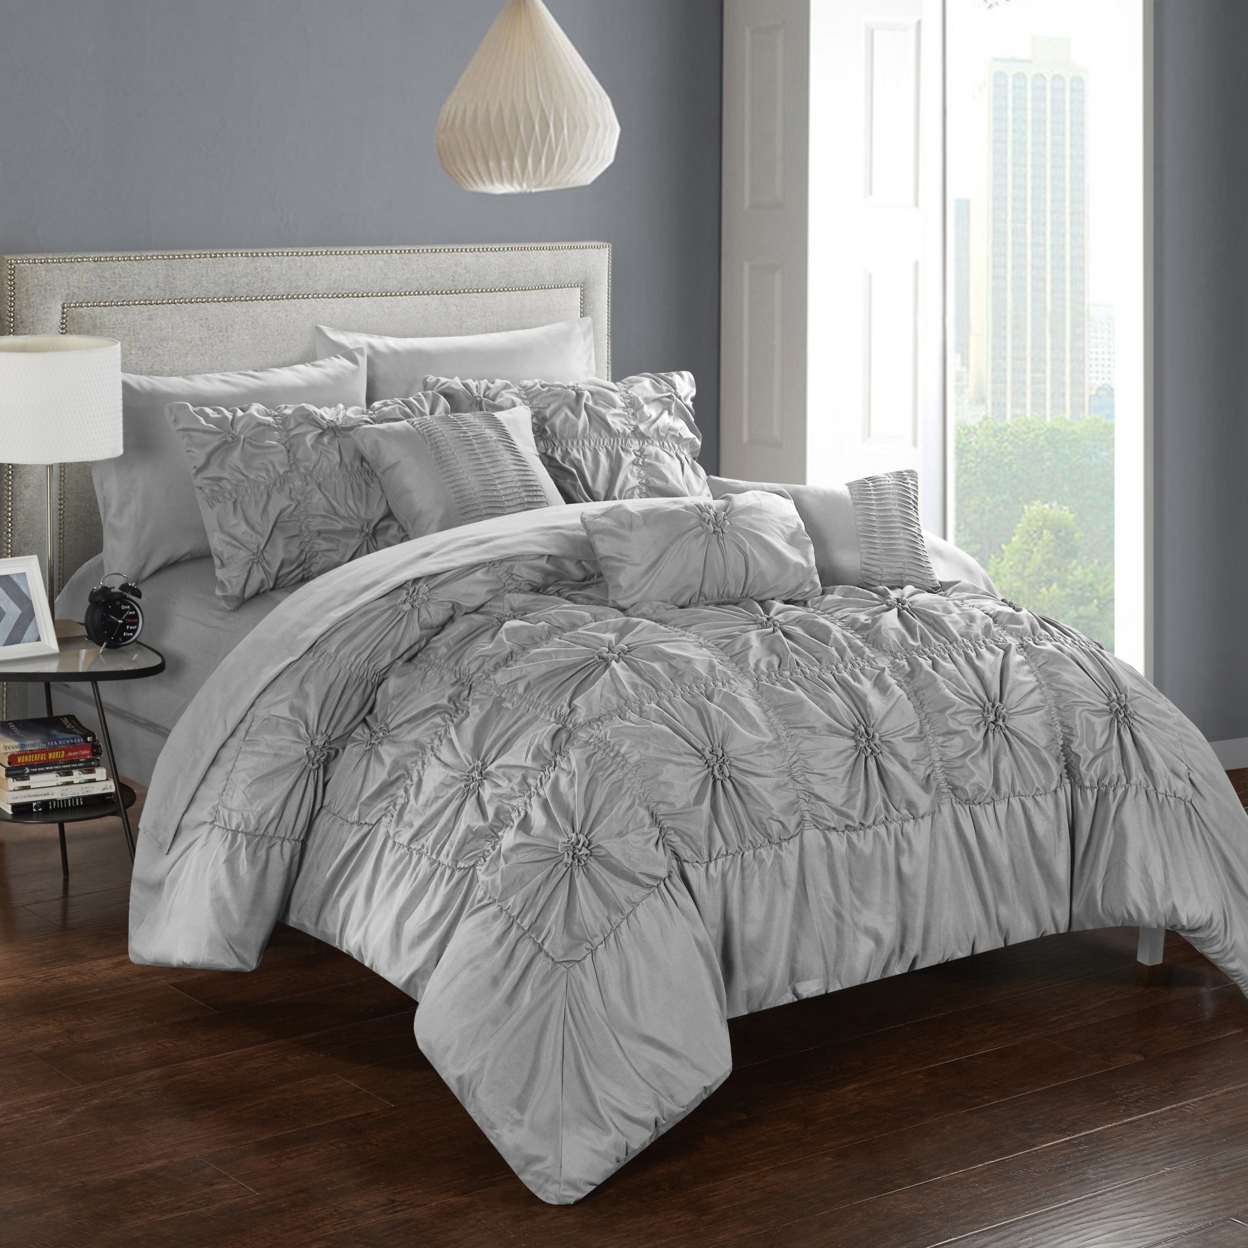 Chic Home 8/10 Piece Sheffield Floral Pinch Pleat Ruffled Designer Embellished Bed In A Bag Comforter Set With Sheet Set - Grey, Twin